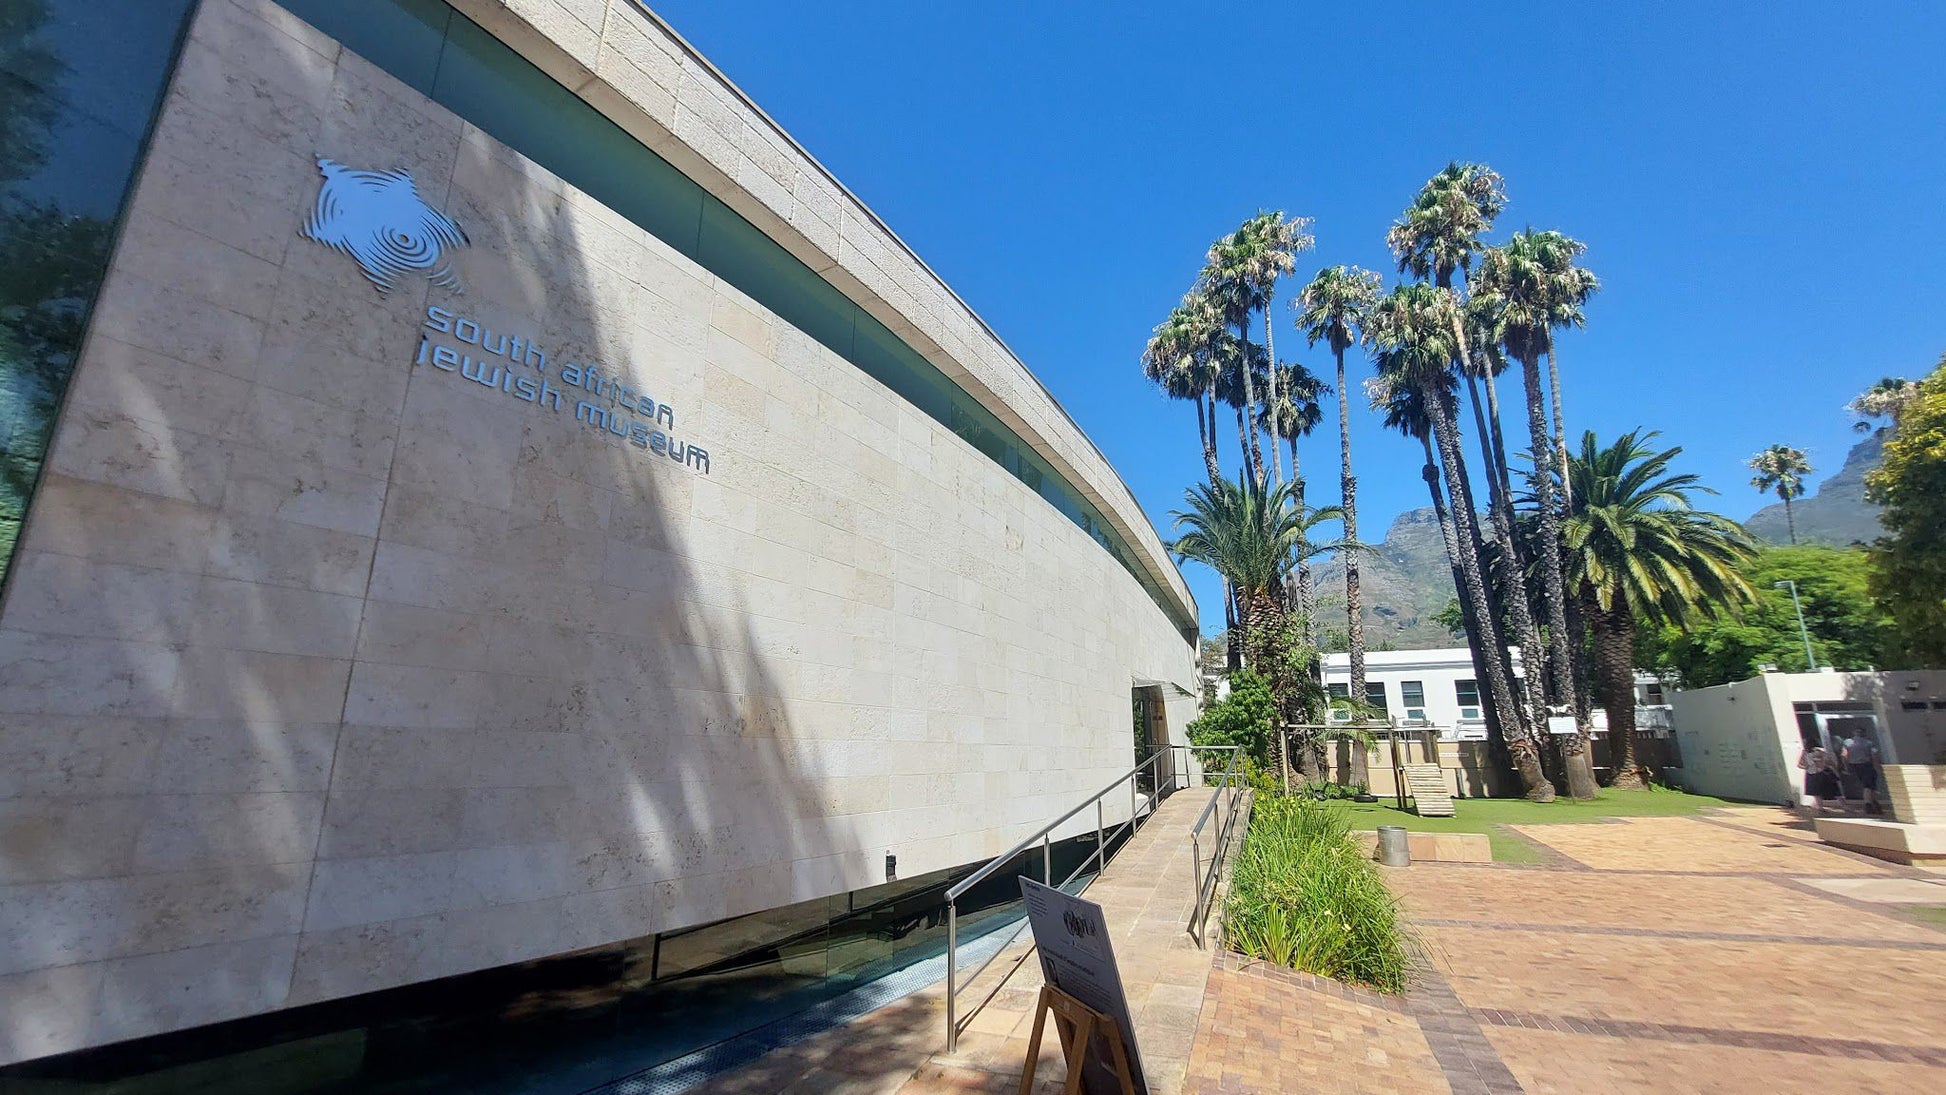  South African Jewish Museum